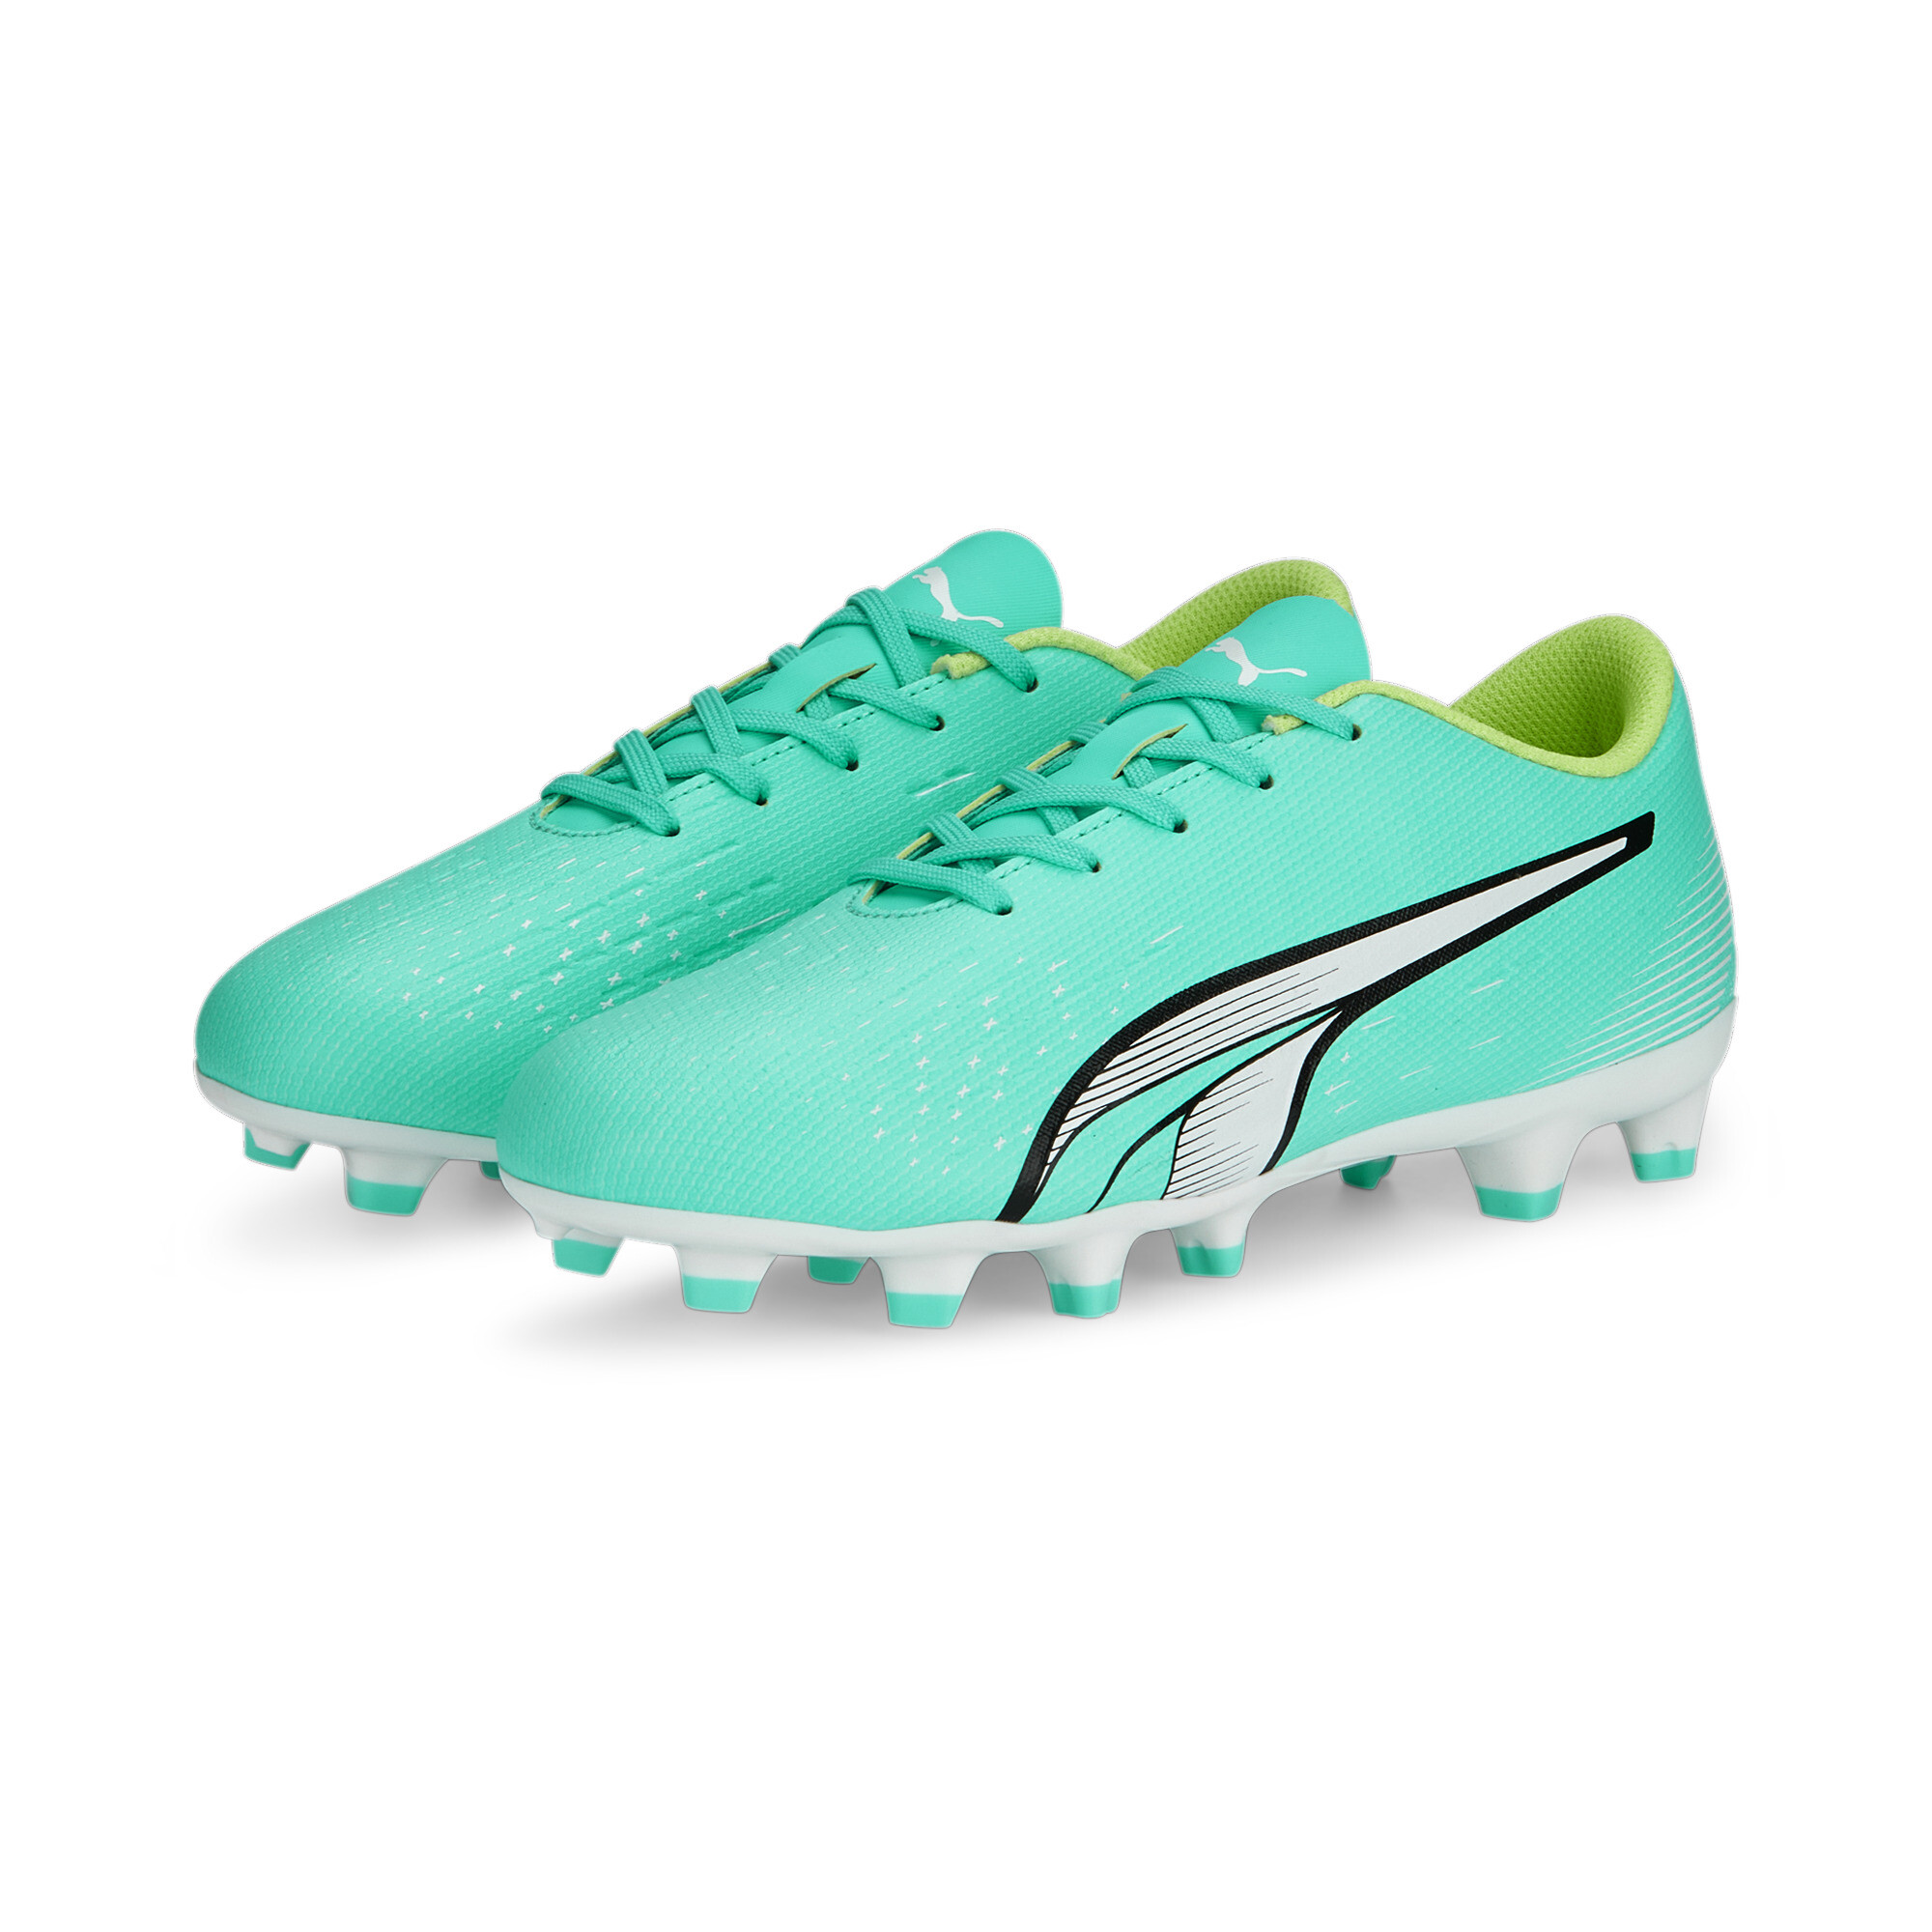 PUMA ULTRA Play FG/AG Football Boots Youth In Green, Size EU 28.5